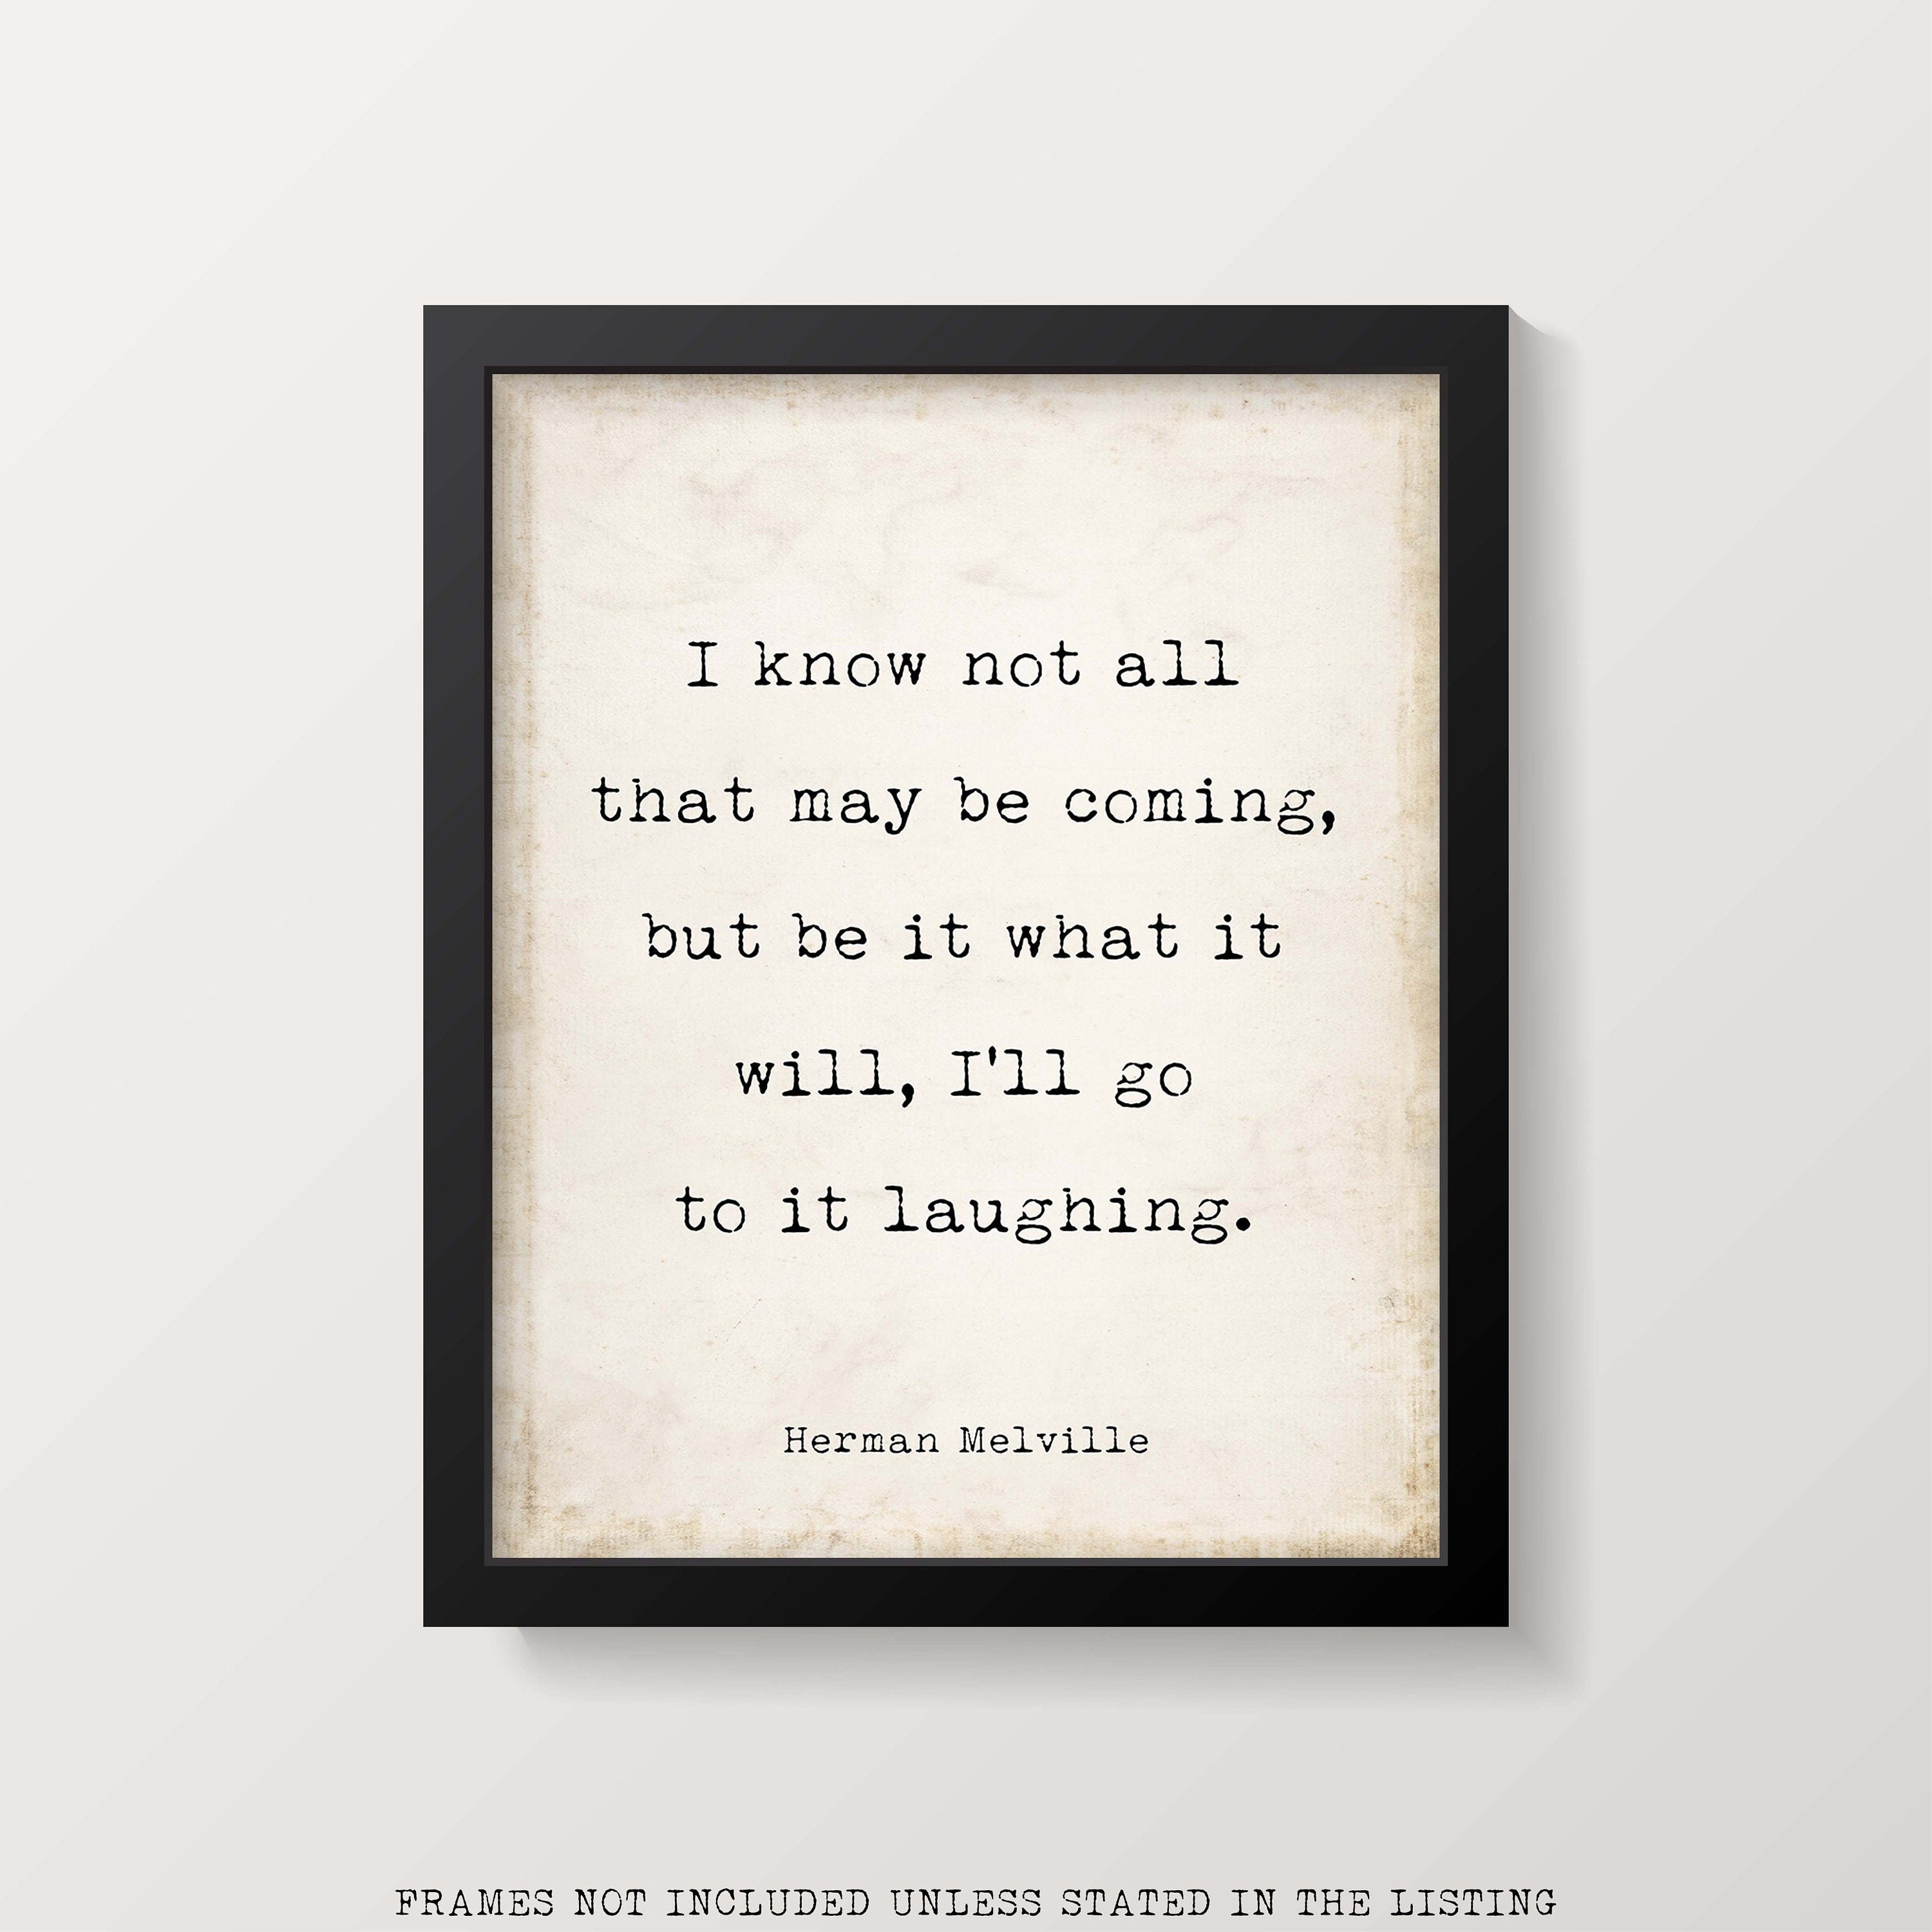 Moby Dick Herman Melville book quote print - I know not all that may be coming